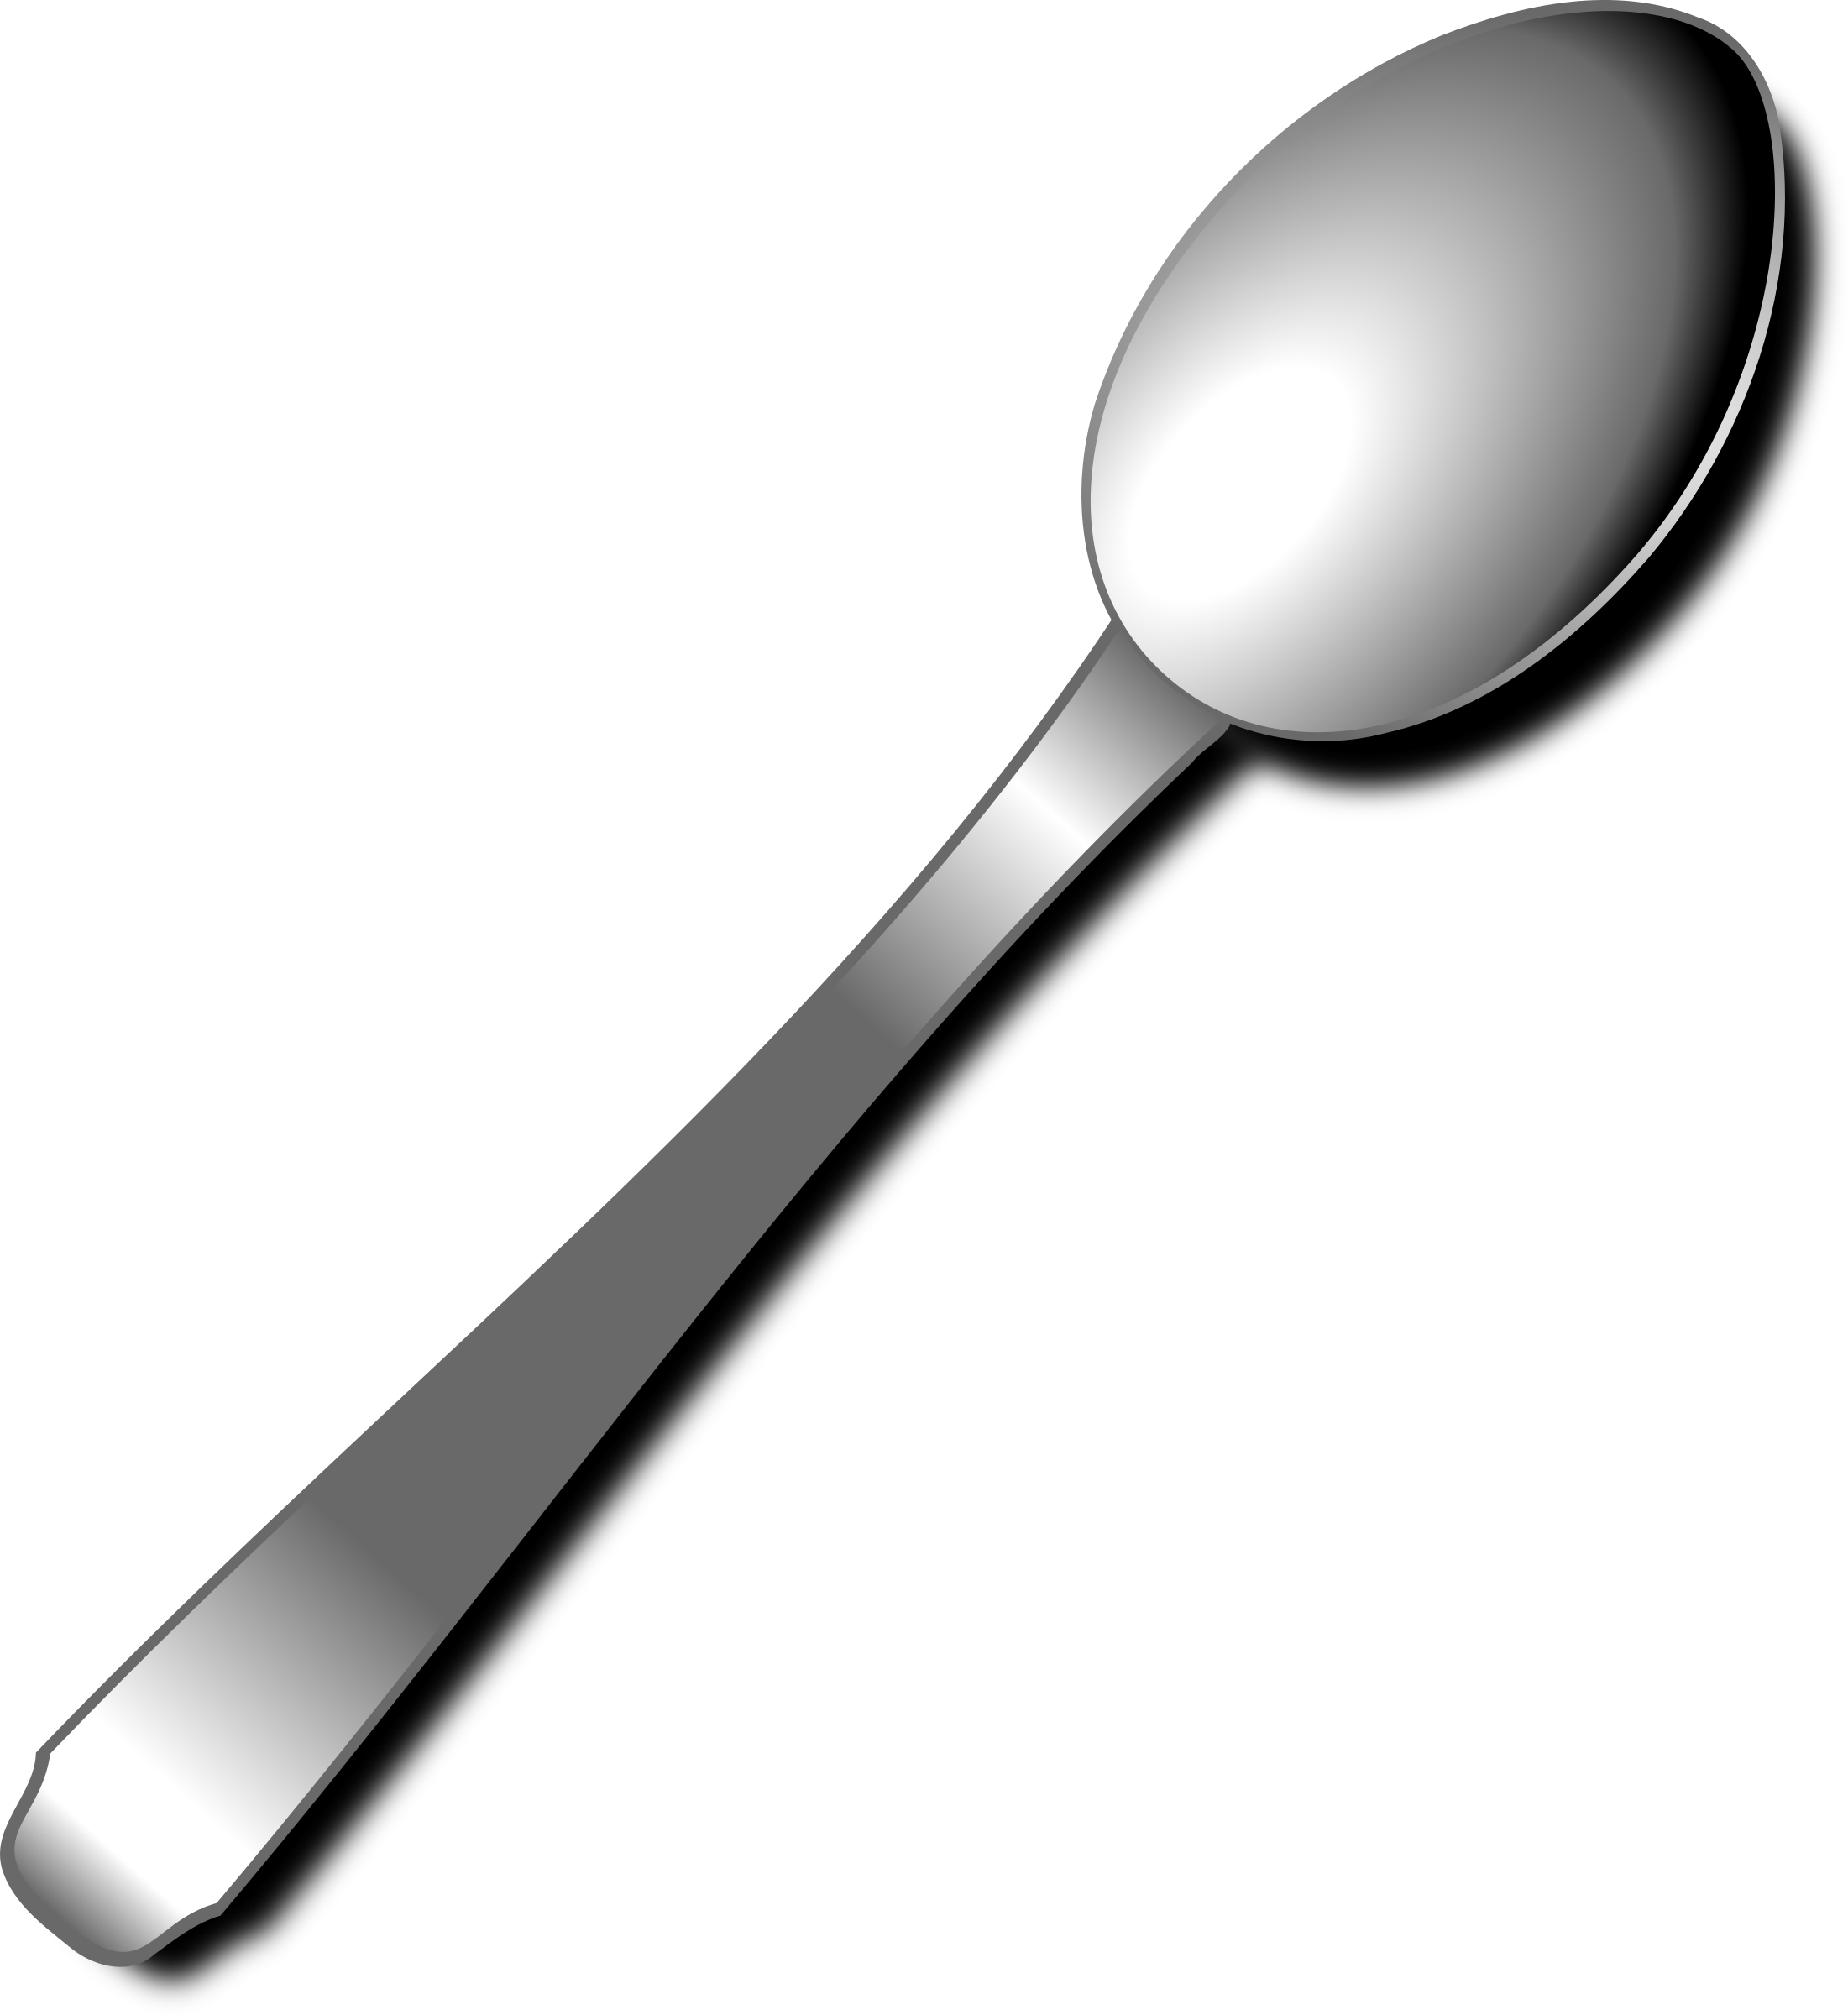 Silver Clipart Cooking Spoon - Clipart Of A Spoon (2201x2400)